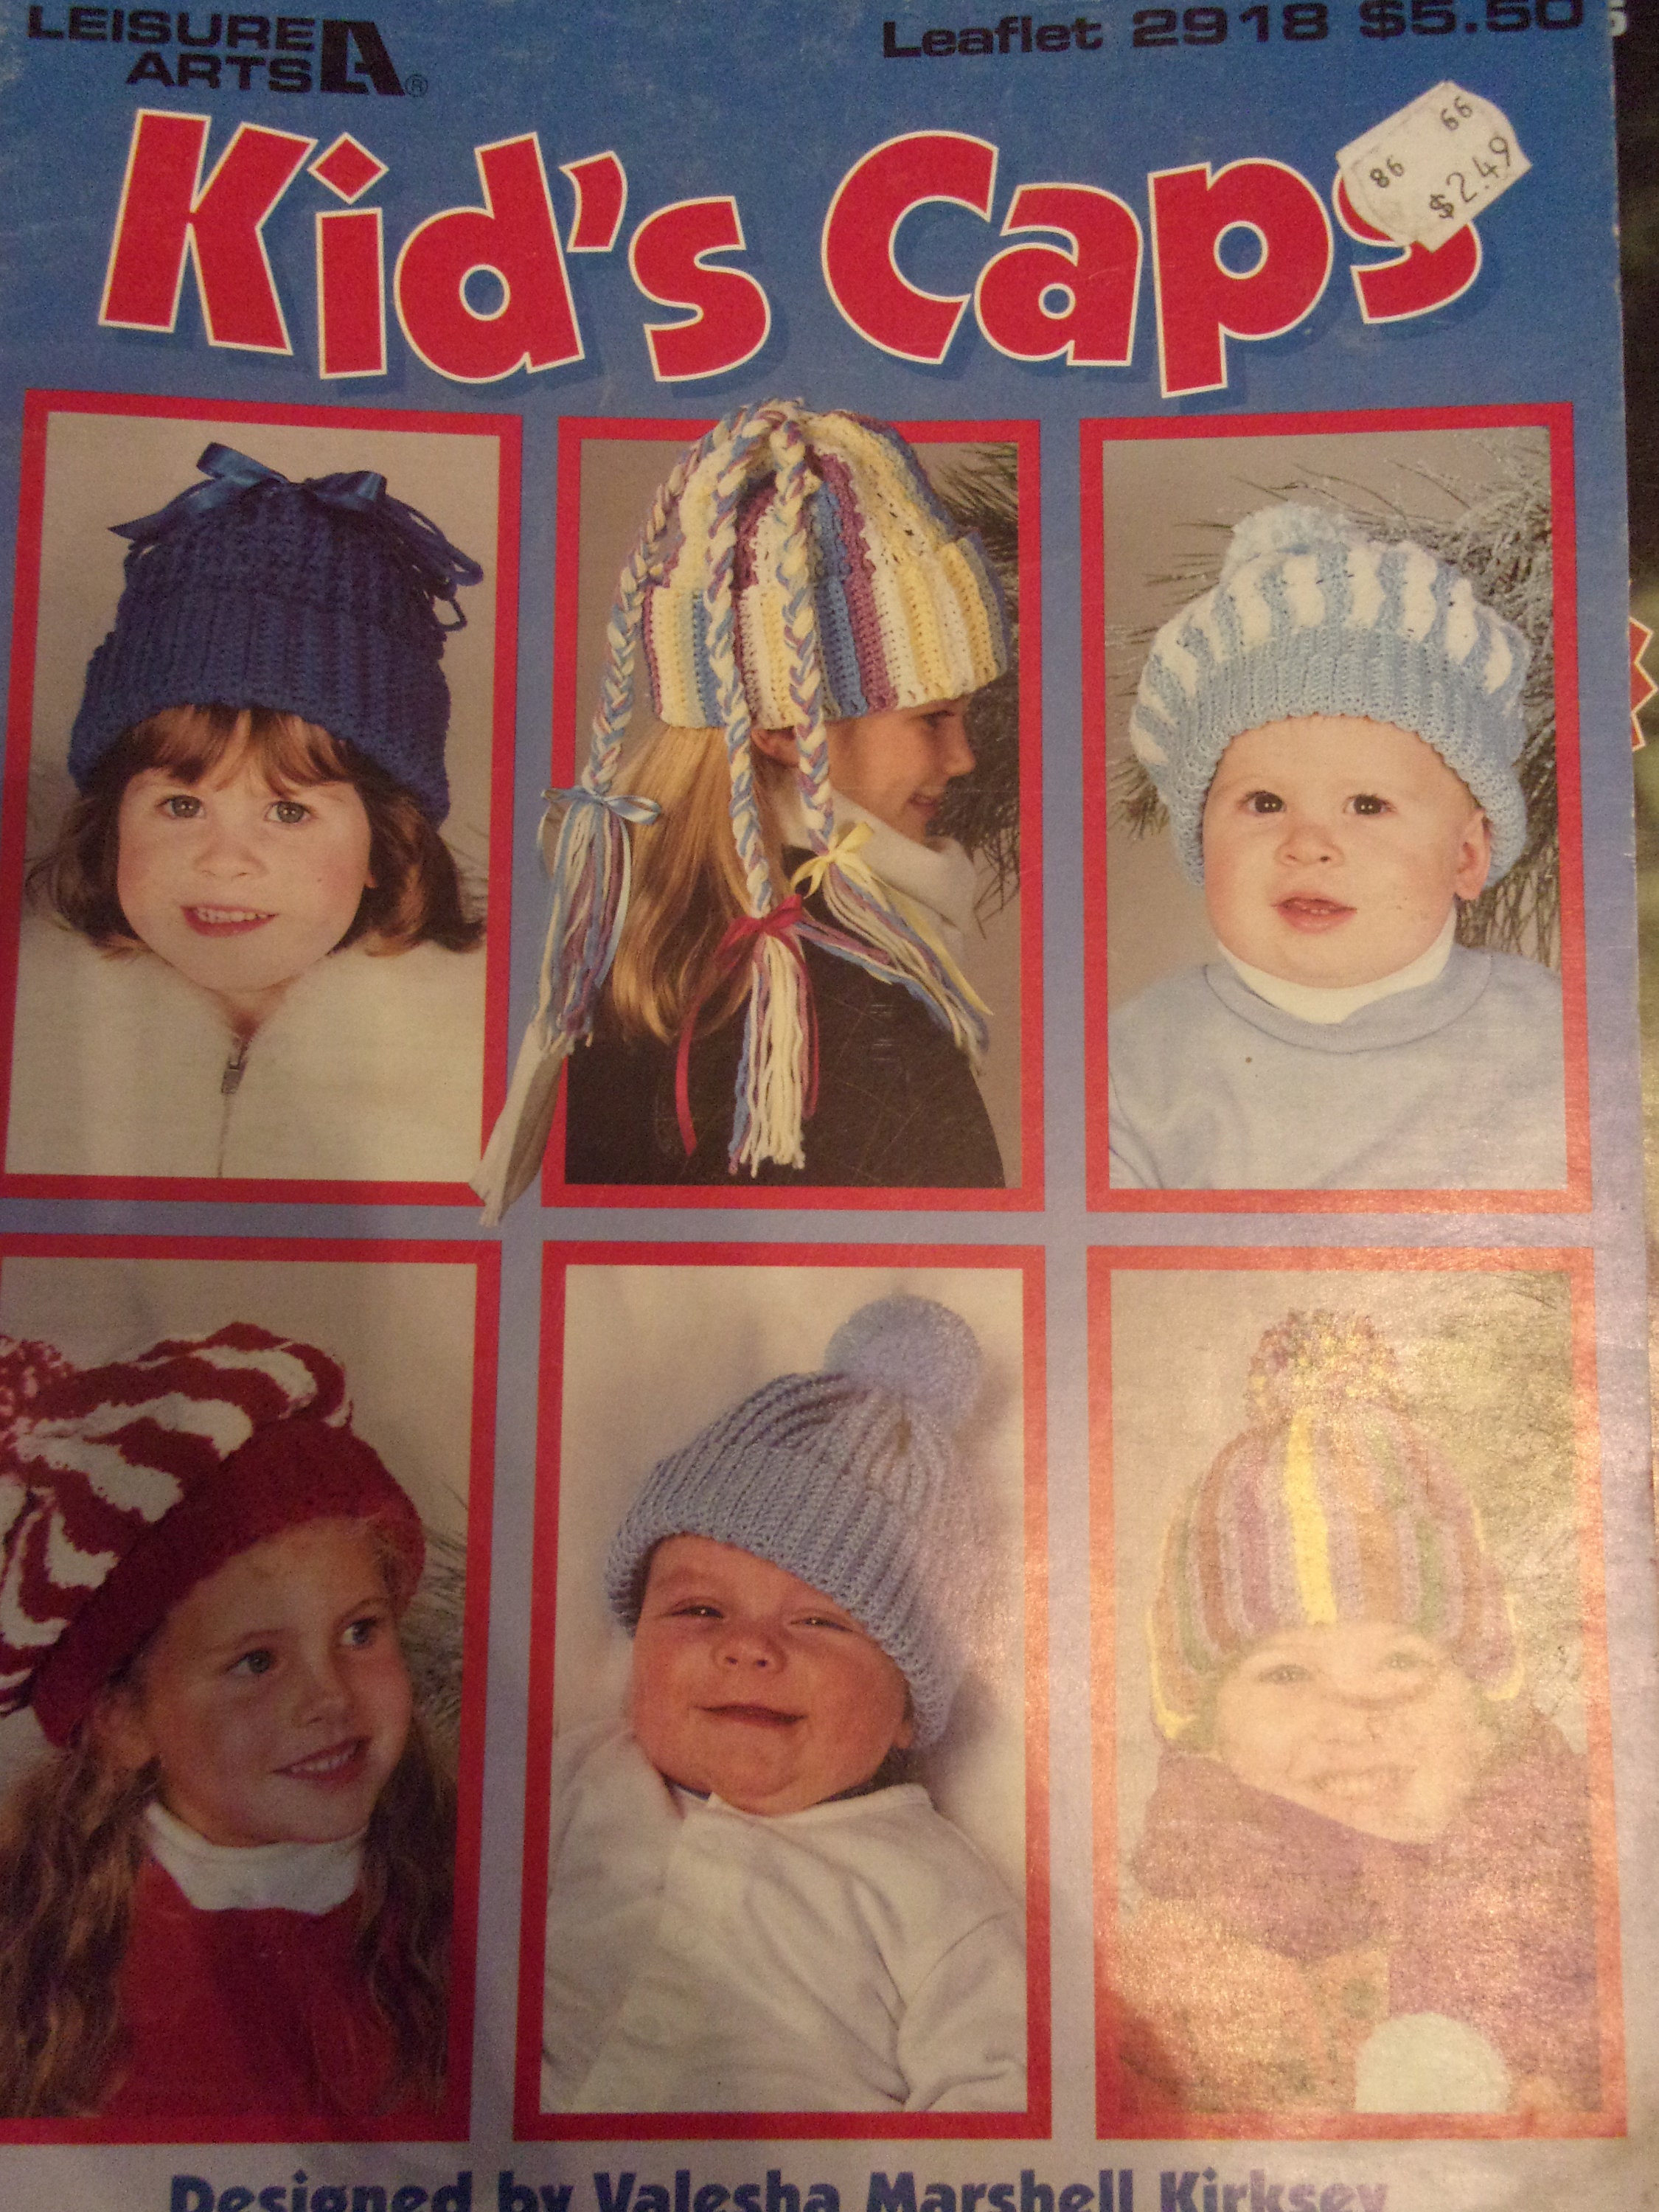 Leisure Arts -Crocheted Hats for The Beginner